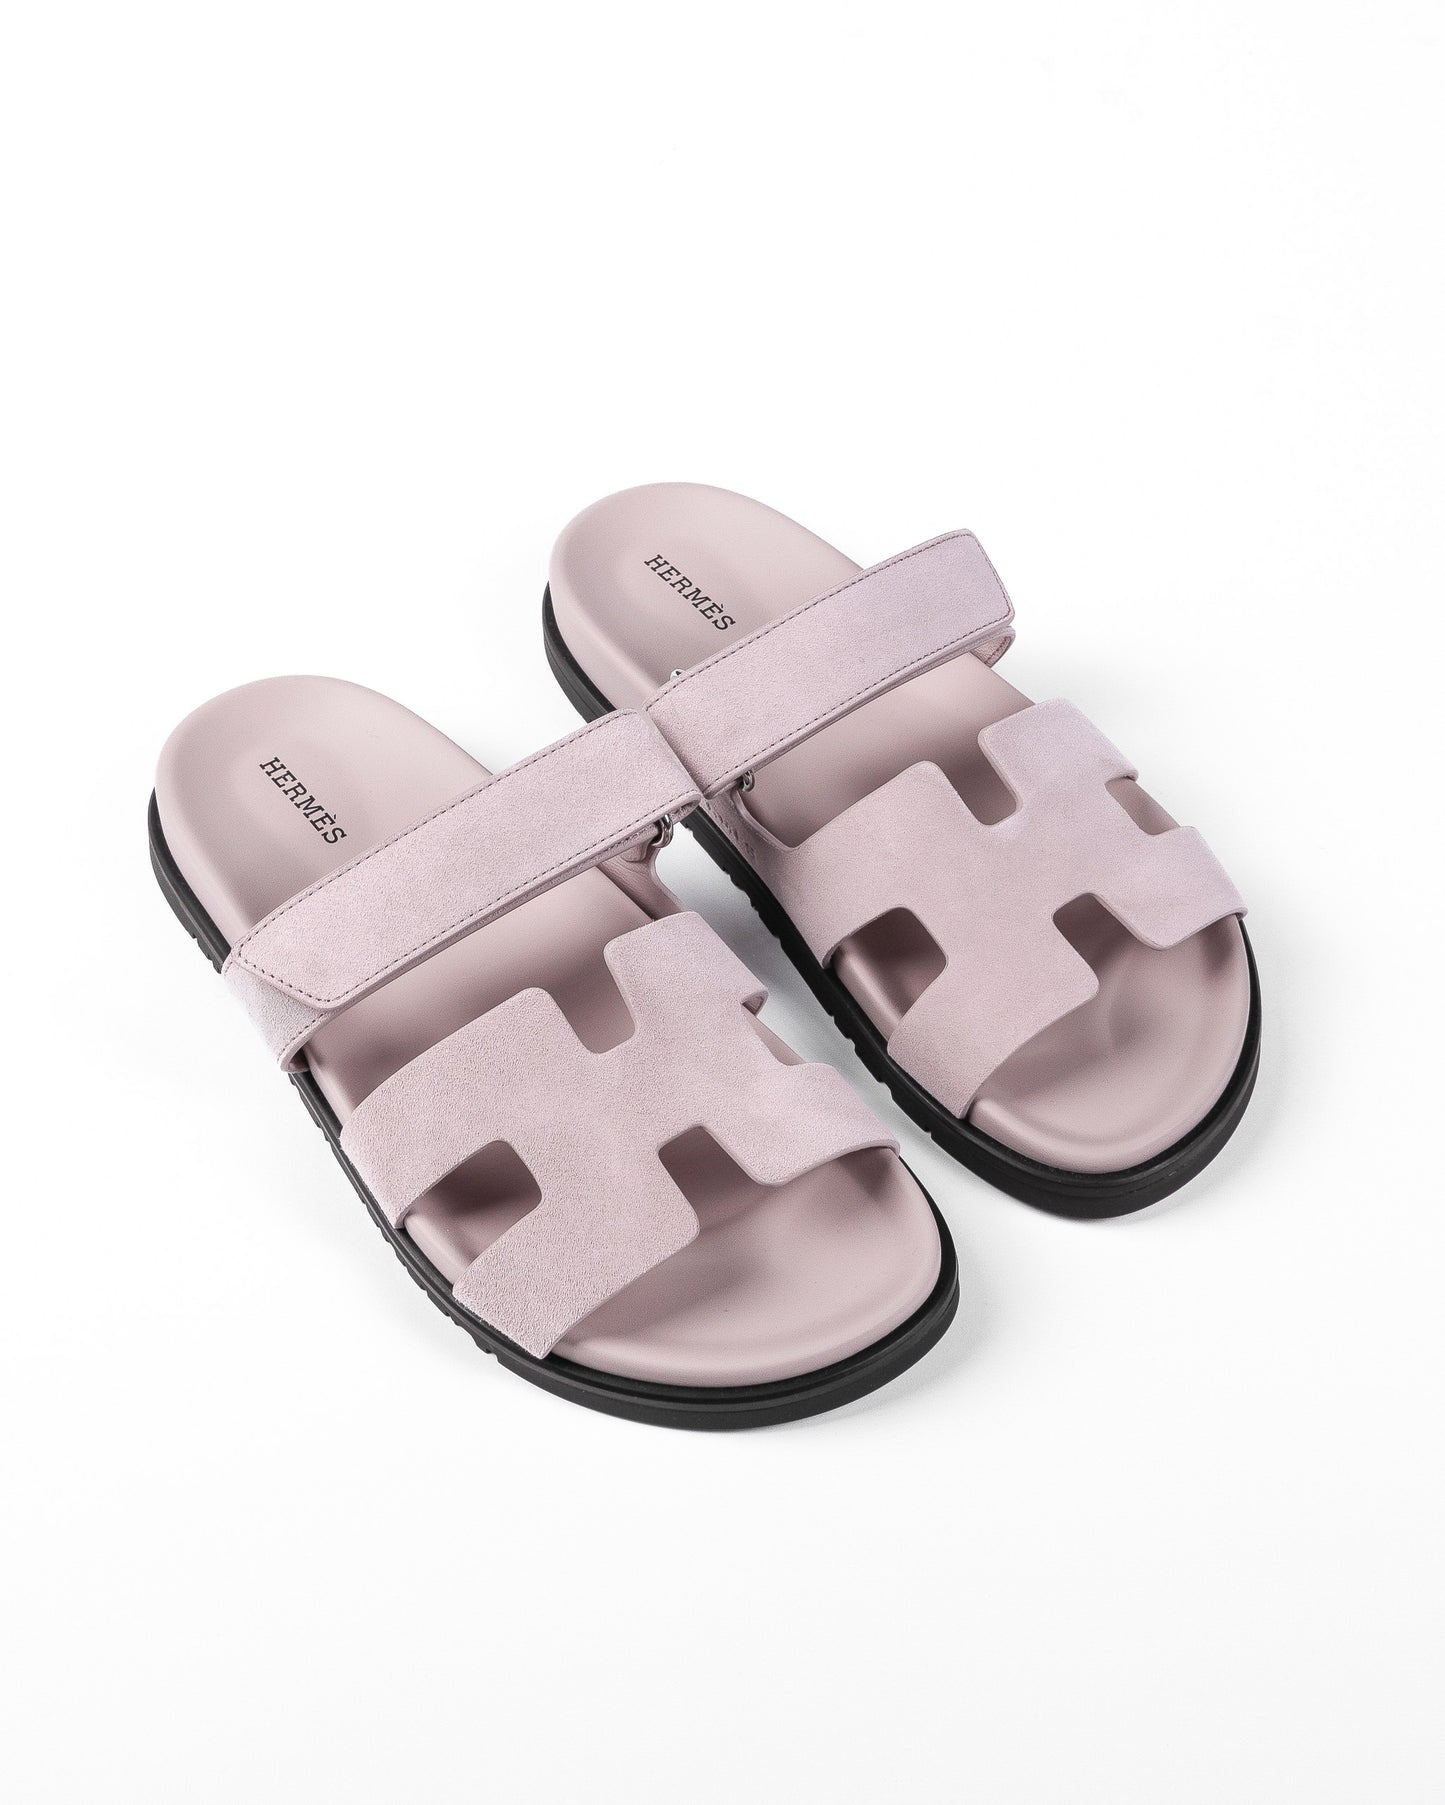 Chypre Sandal Rose Porcelaine in Suede leather